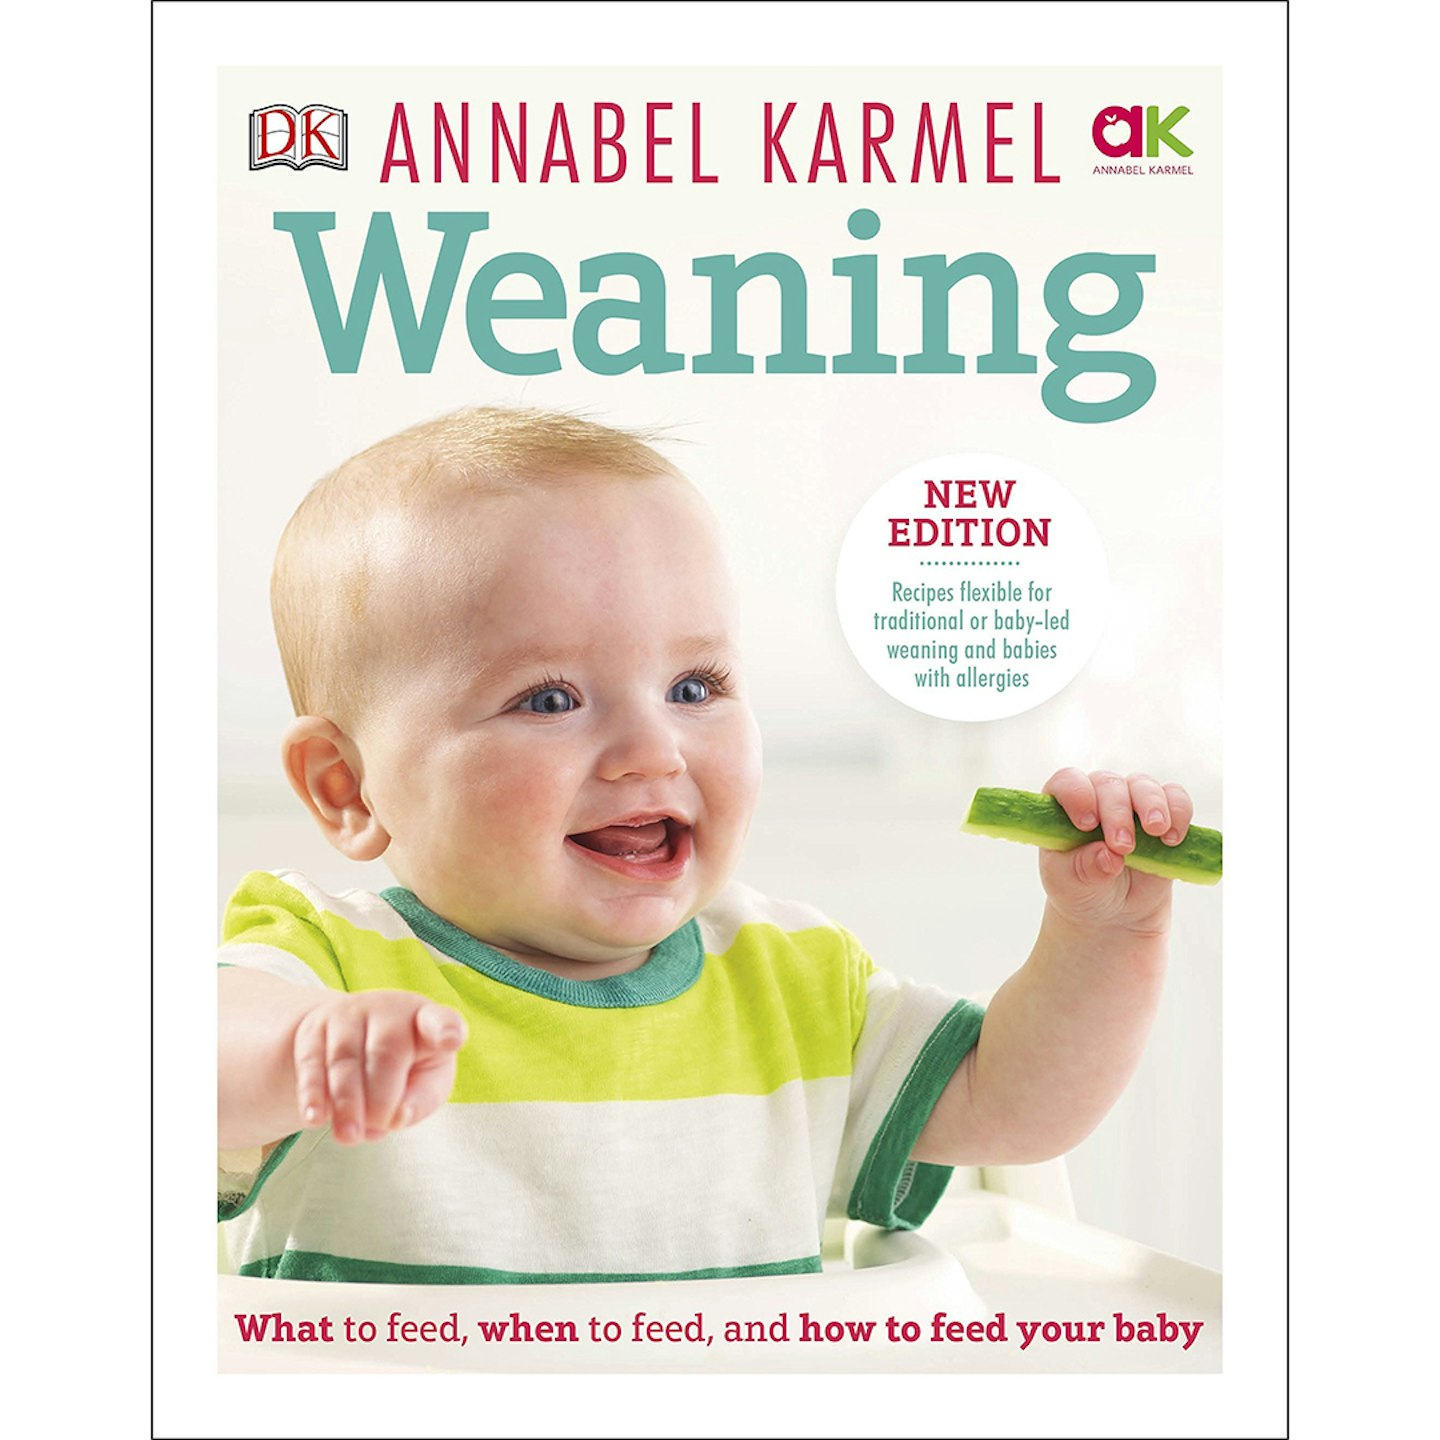 Weaning: New Edition